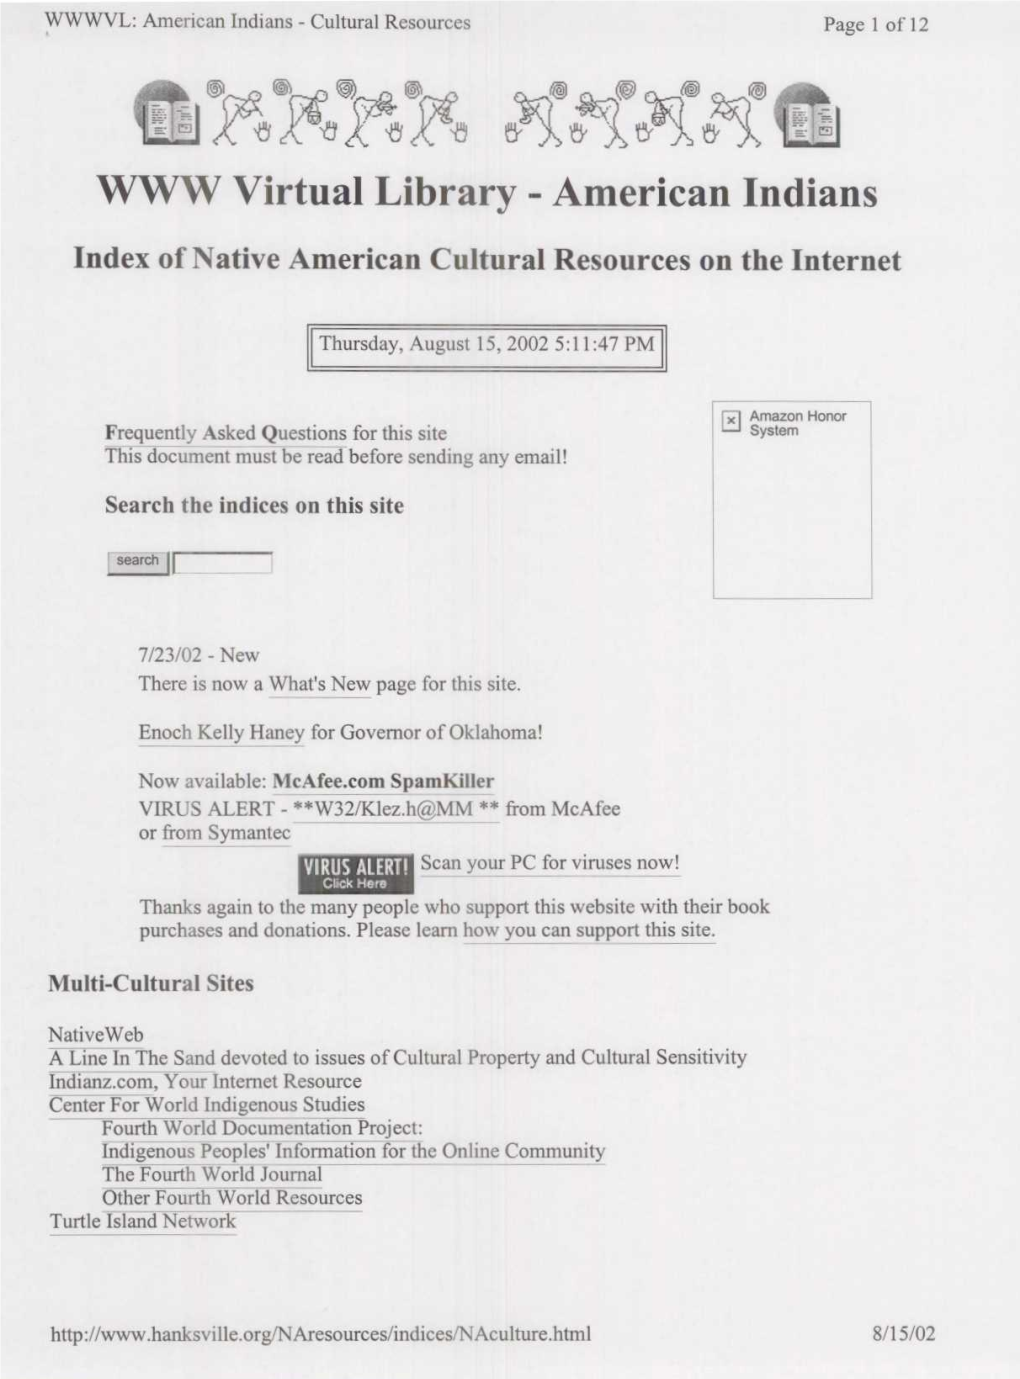 Index of Native American Cultural Resources on the Internet